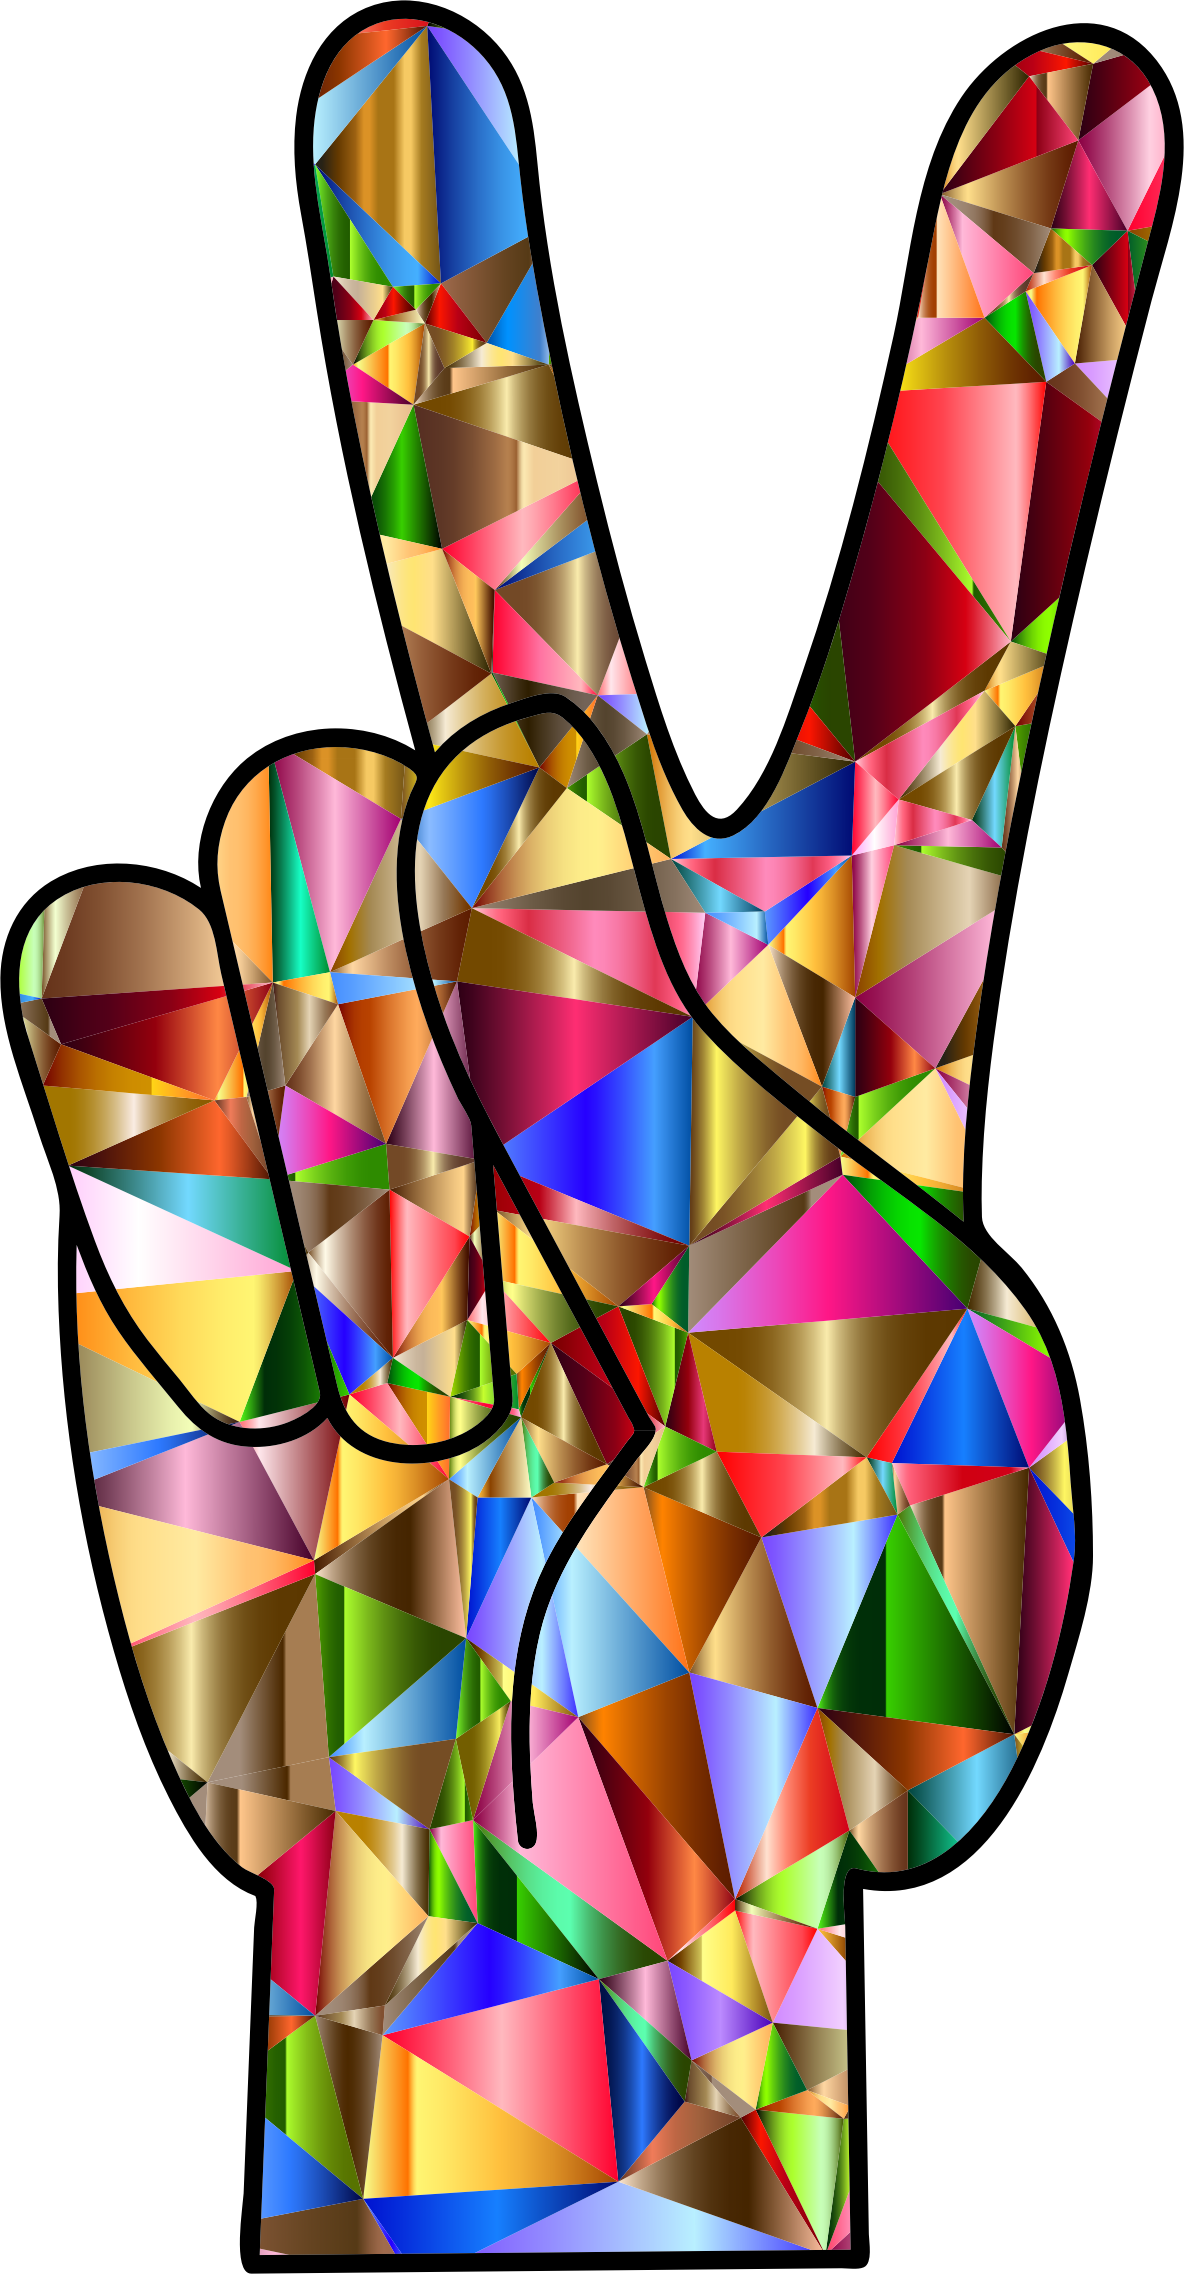 Big Image - Colorful Peace Hand Sign (1184x2274)